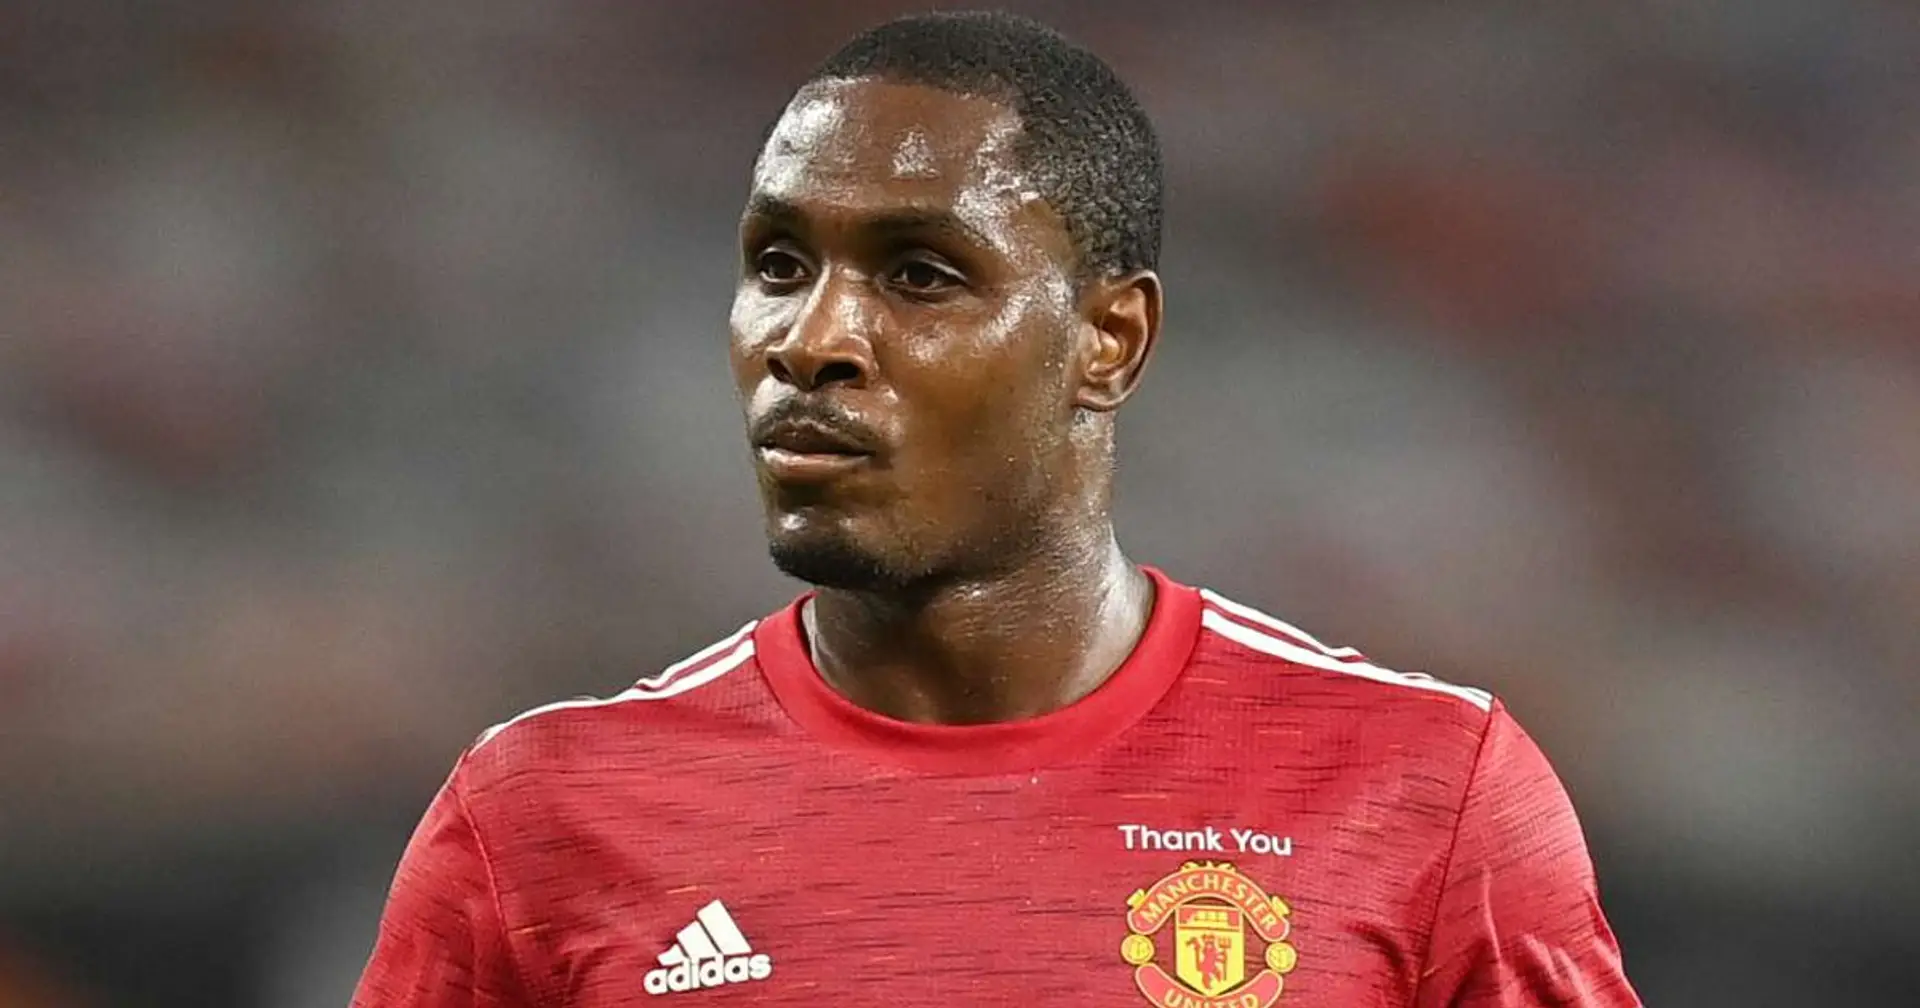 'There were certain games where I thought I'd play': Ighalo admits he felt bit unfairly treated in second loan spell at United